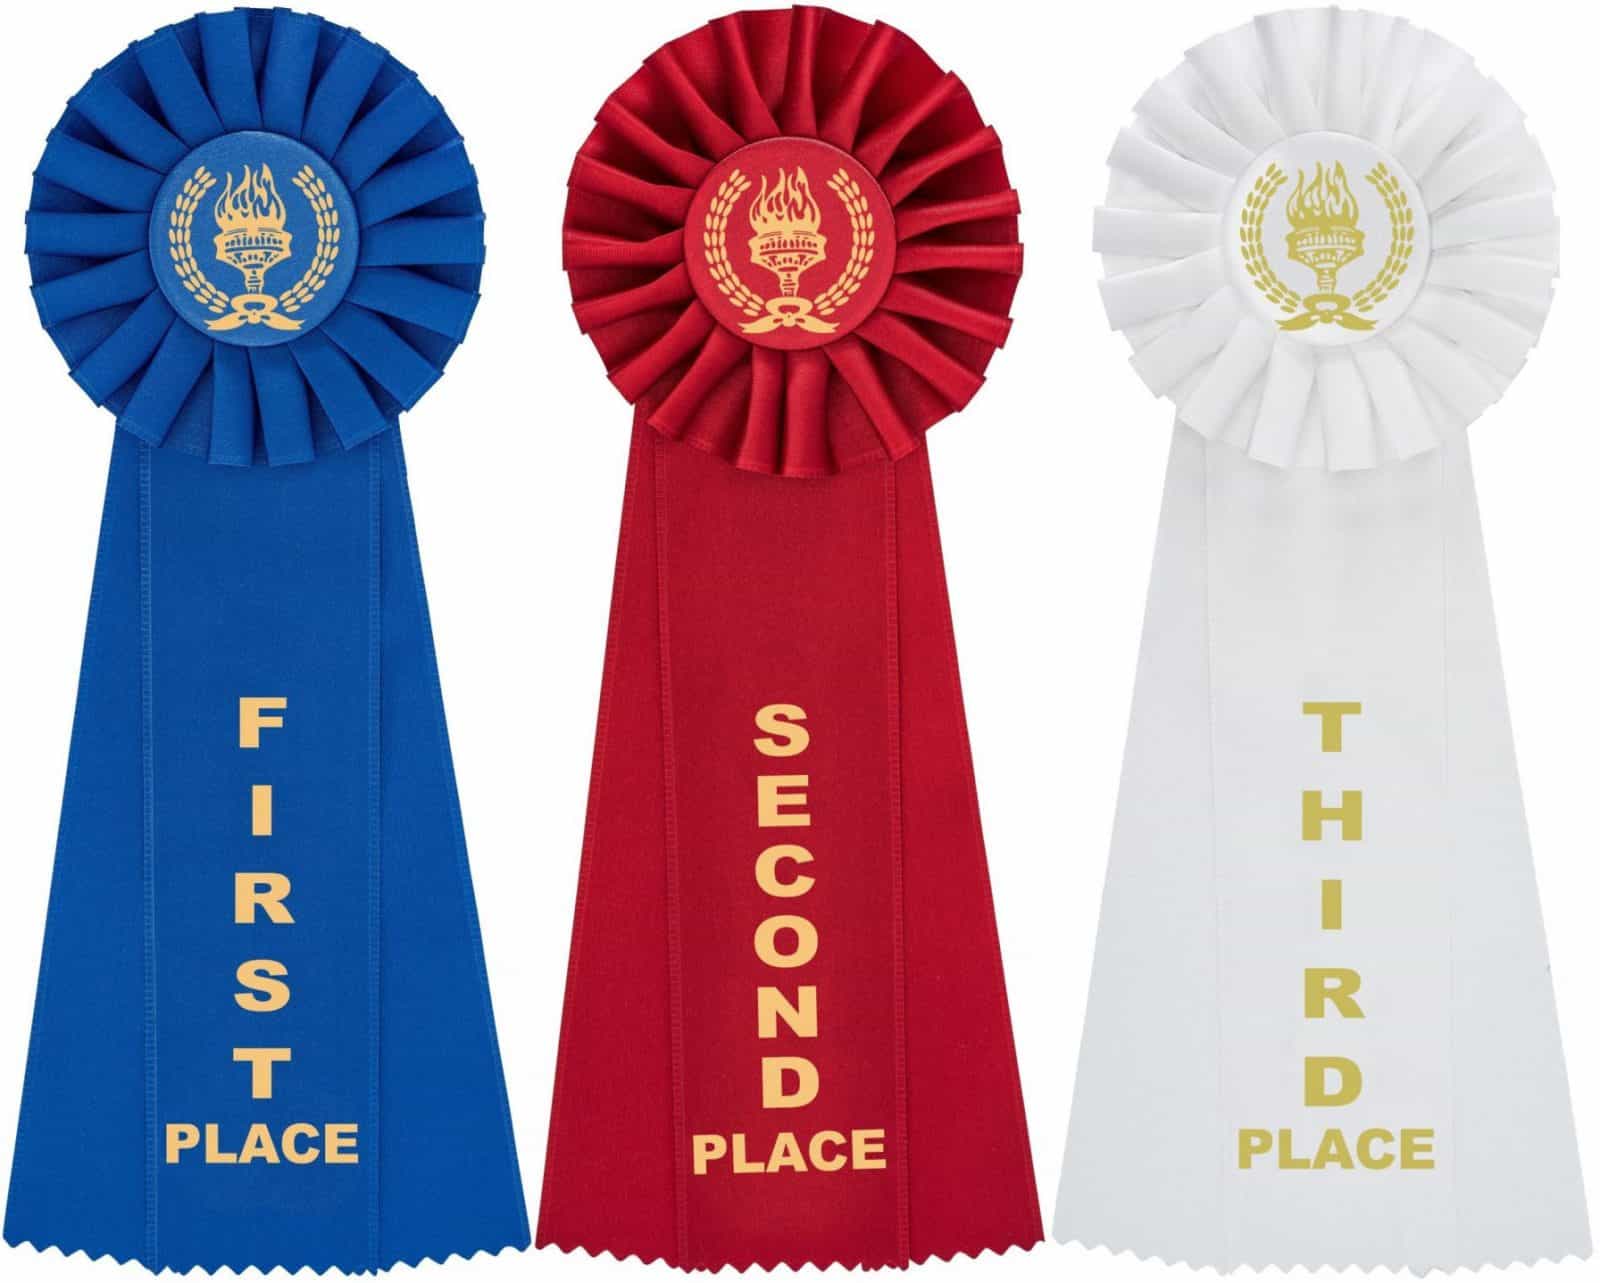 victory-award-rosette-ribbons-1st-2nd-3rd-place-achievements